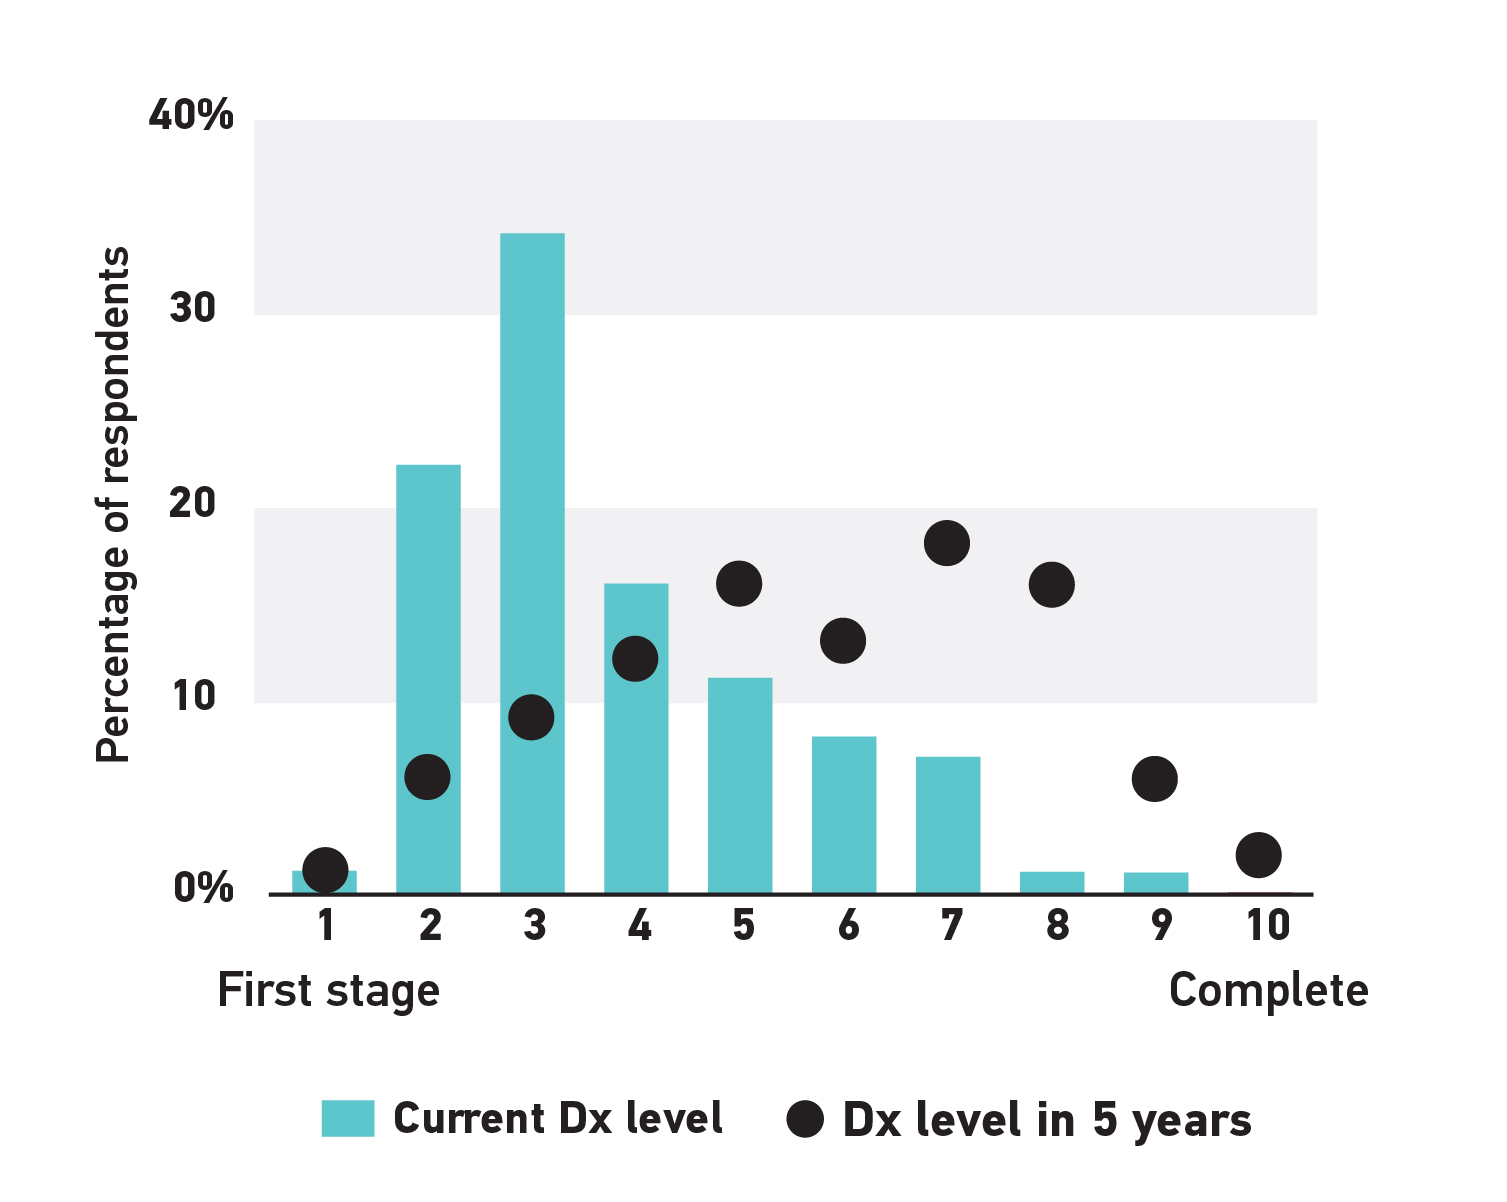 Dx level rating 1: 1% Currently , 5% in five years; Rating 2: 22% currently, 6% in five years; Rating 3: 33% currently, 9% in five years; Rating 4: 16% currently, 12% in five years;  Rating 5: 11% currently, 16% in five years; Rating 6: 8% currently, 13% in five years; Rating 7: 7% currently, 18% in five years; Rating 8: a% currently, 16% in five years; Rating 9: 1% currently, 6% in five years;  Rating 10: 0% currently, 2% in five years